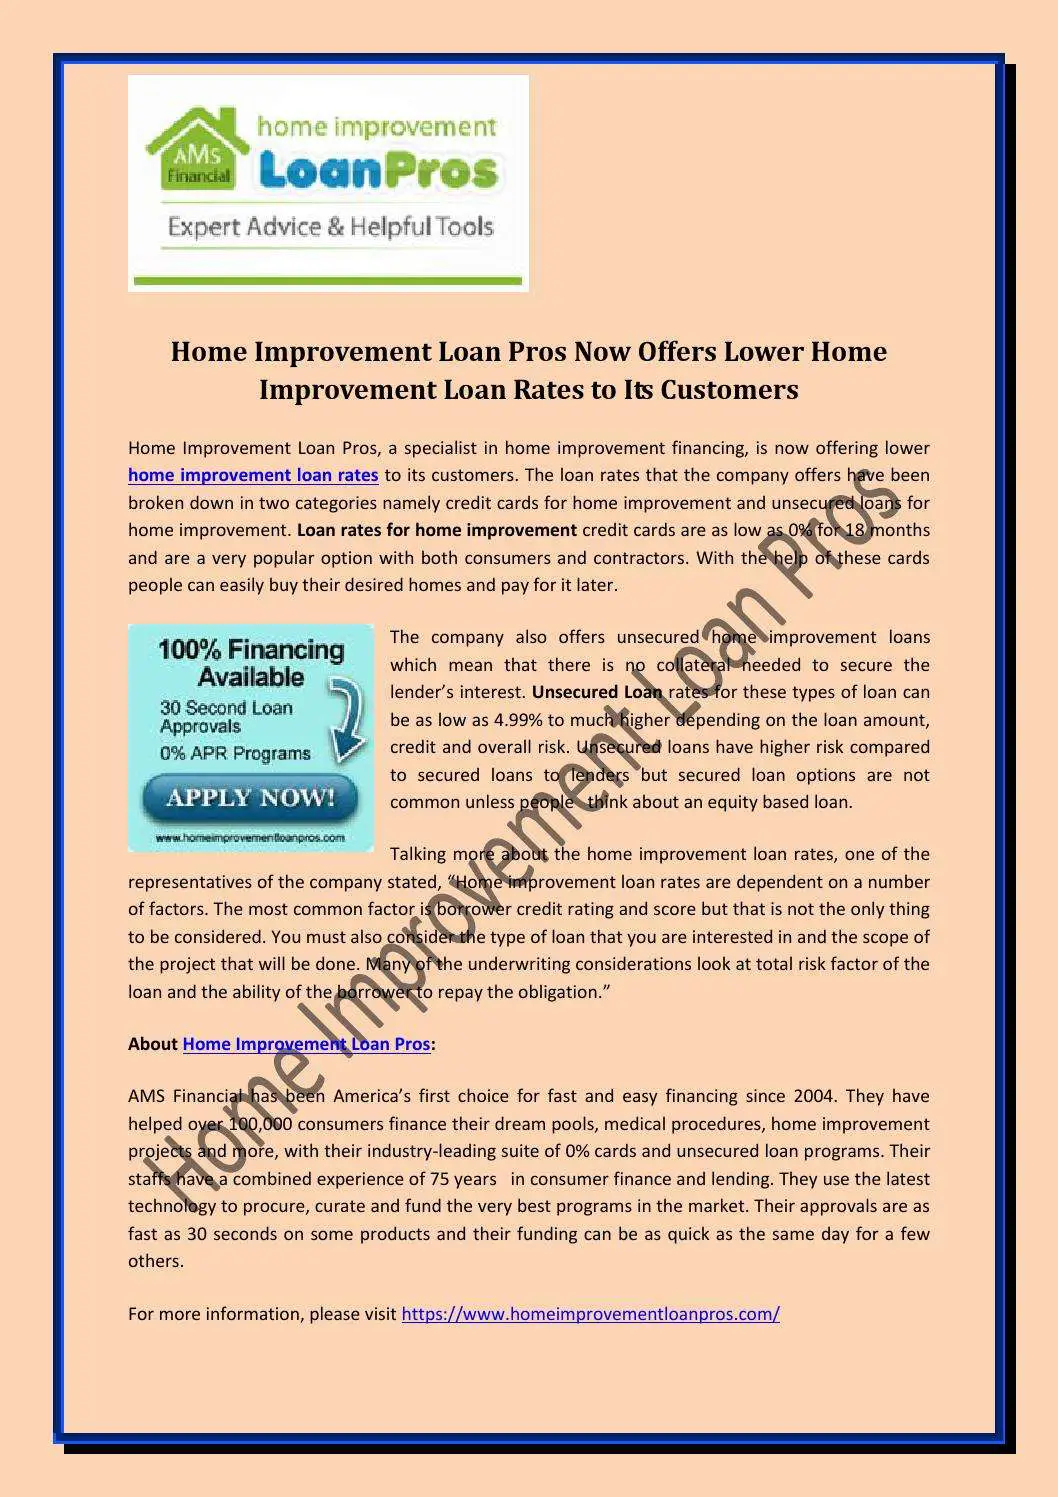 Home improvement loan pros now offers lower home improvement loan rates ...